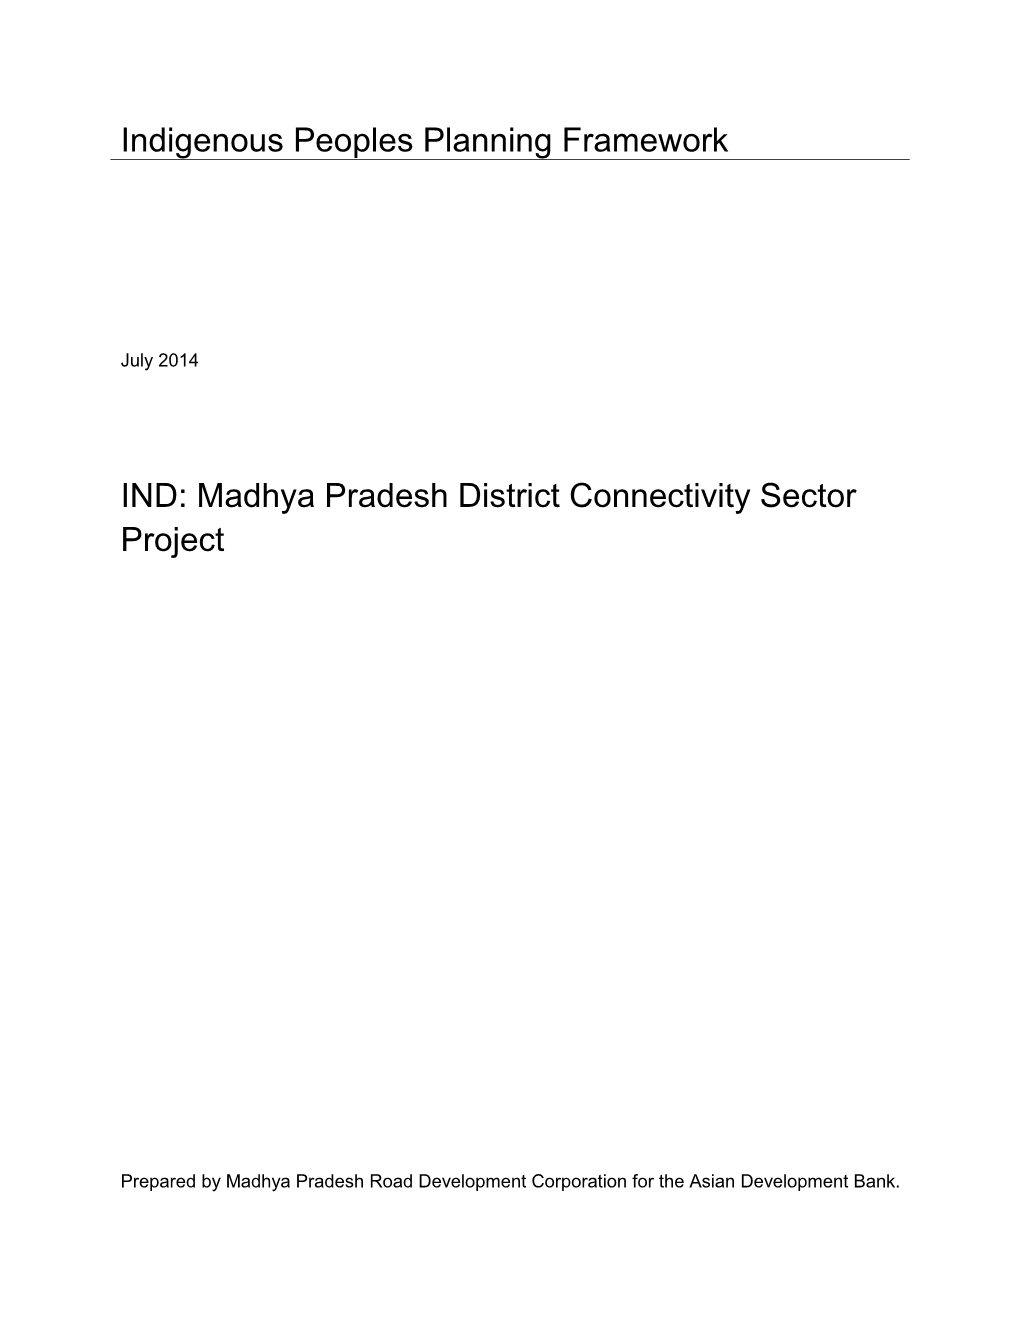 Madhya Pradesh District Connectivity Sector Project